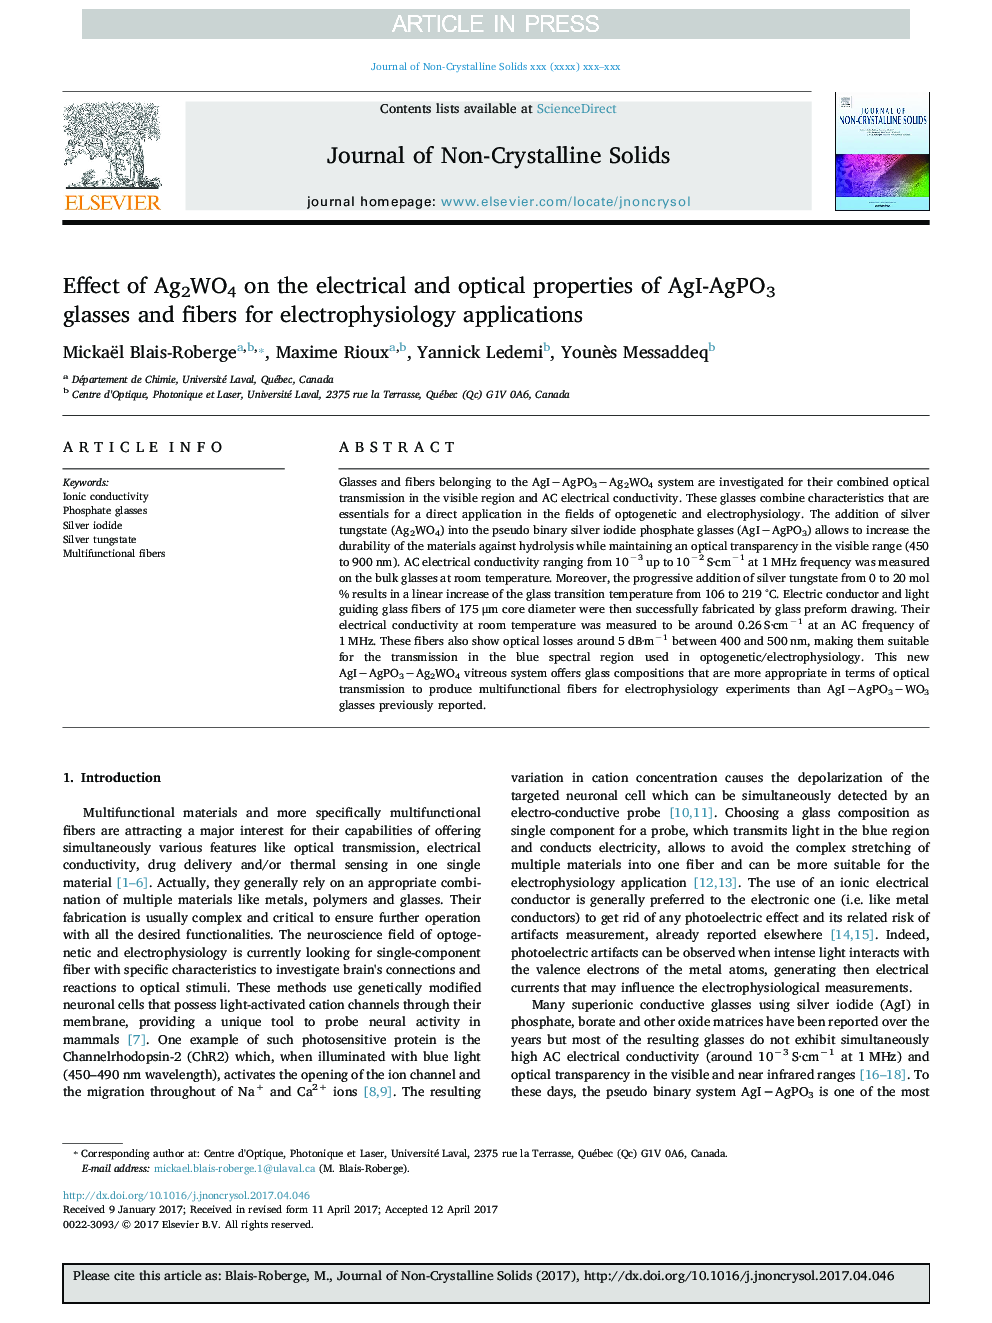 Effect of Ag2WO4 on the electrical and optical properties of AgI-AgPO3 glasses and fibers for electrophysiology applications